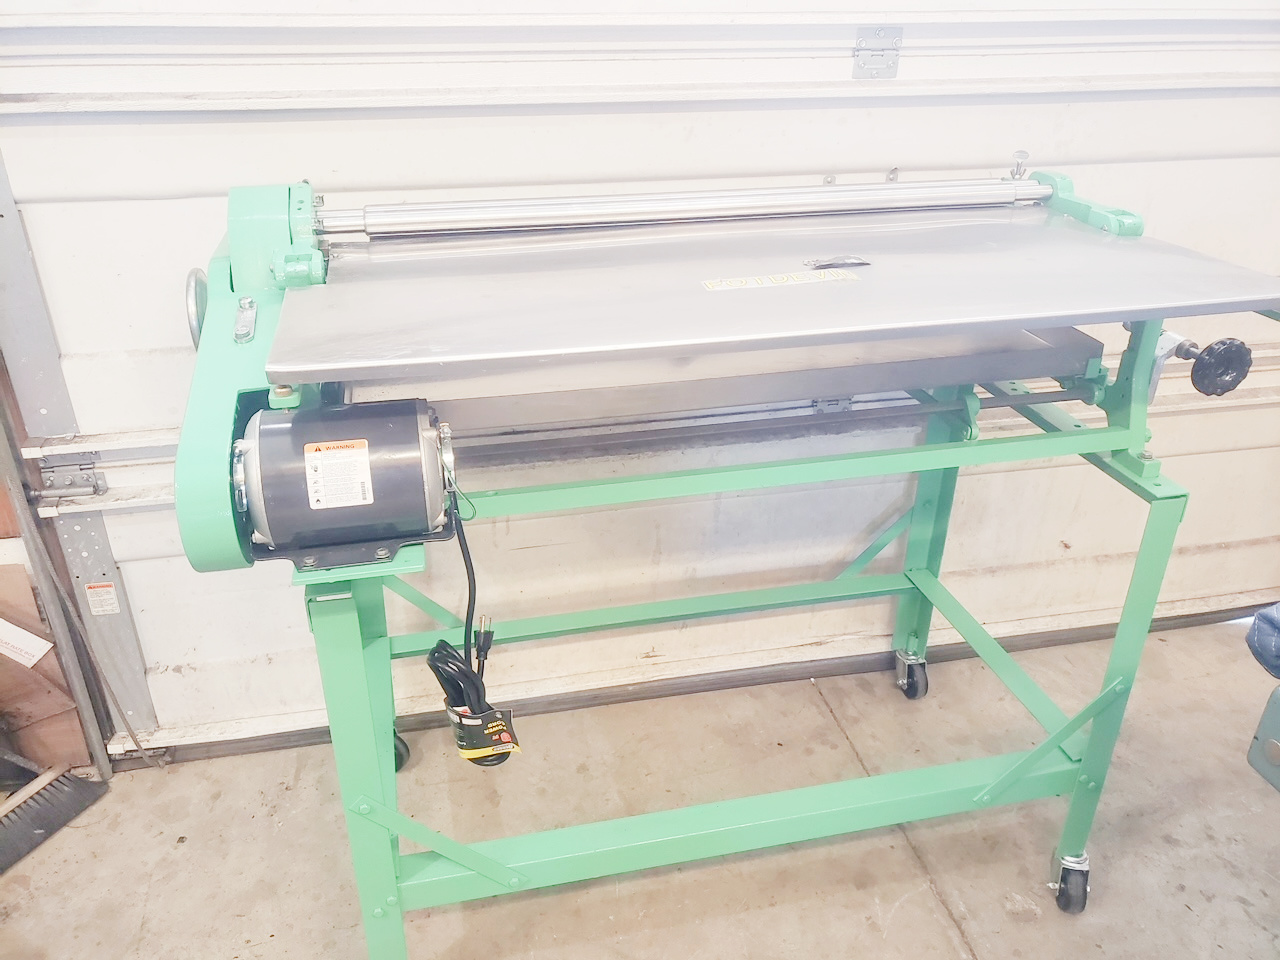 Equipment Lot: Potdevin NTZ36 36″ Cold Gluer & Coda 44″ Pinch Feed Roller w/ Variable Speed Control (used) Item # UE-052522B (Indiana)